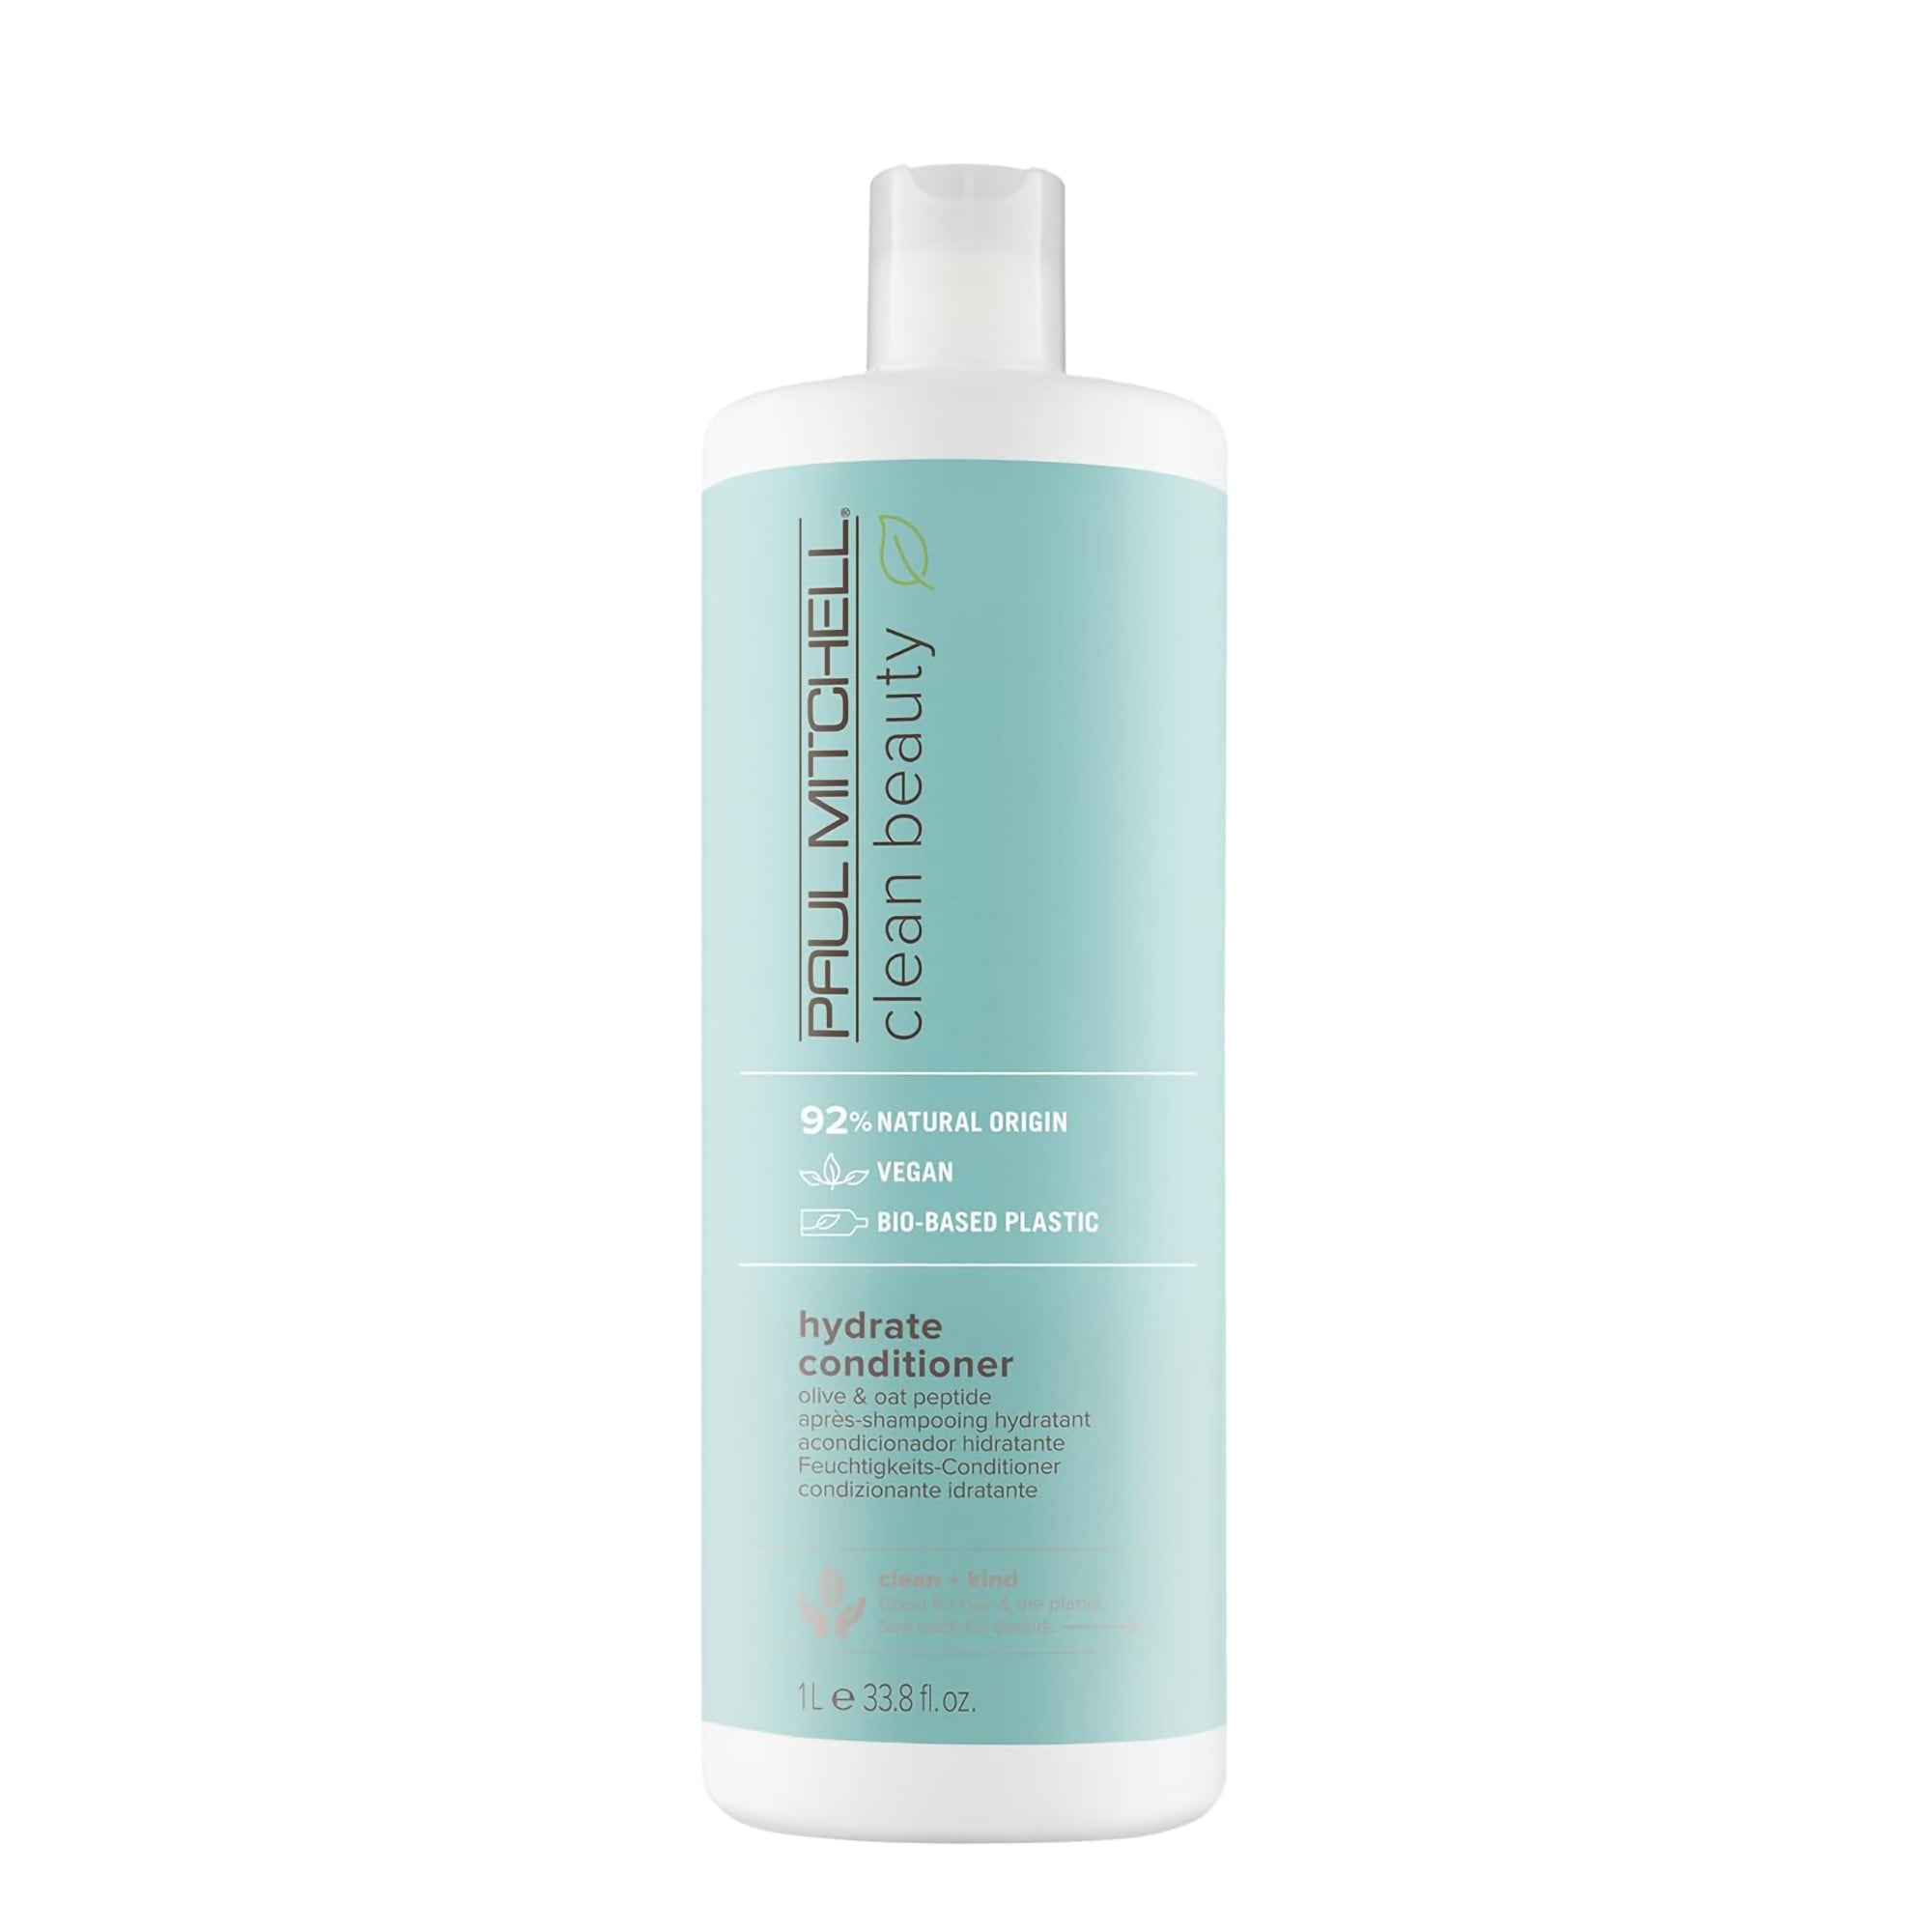 Paul Mitchell Clean Beauty Hydrate Conditioner - 33oz / 33OZ